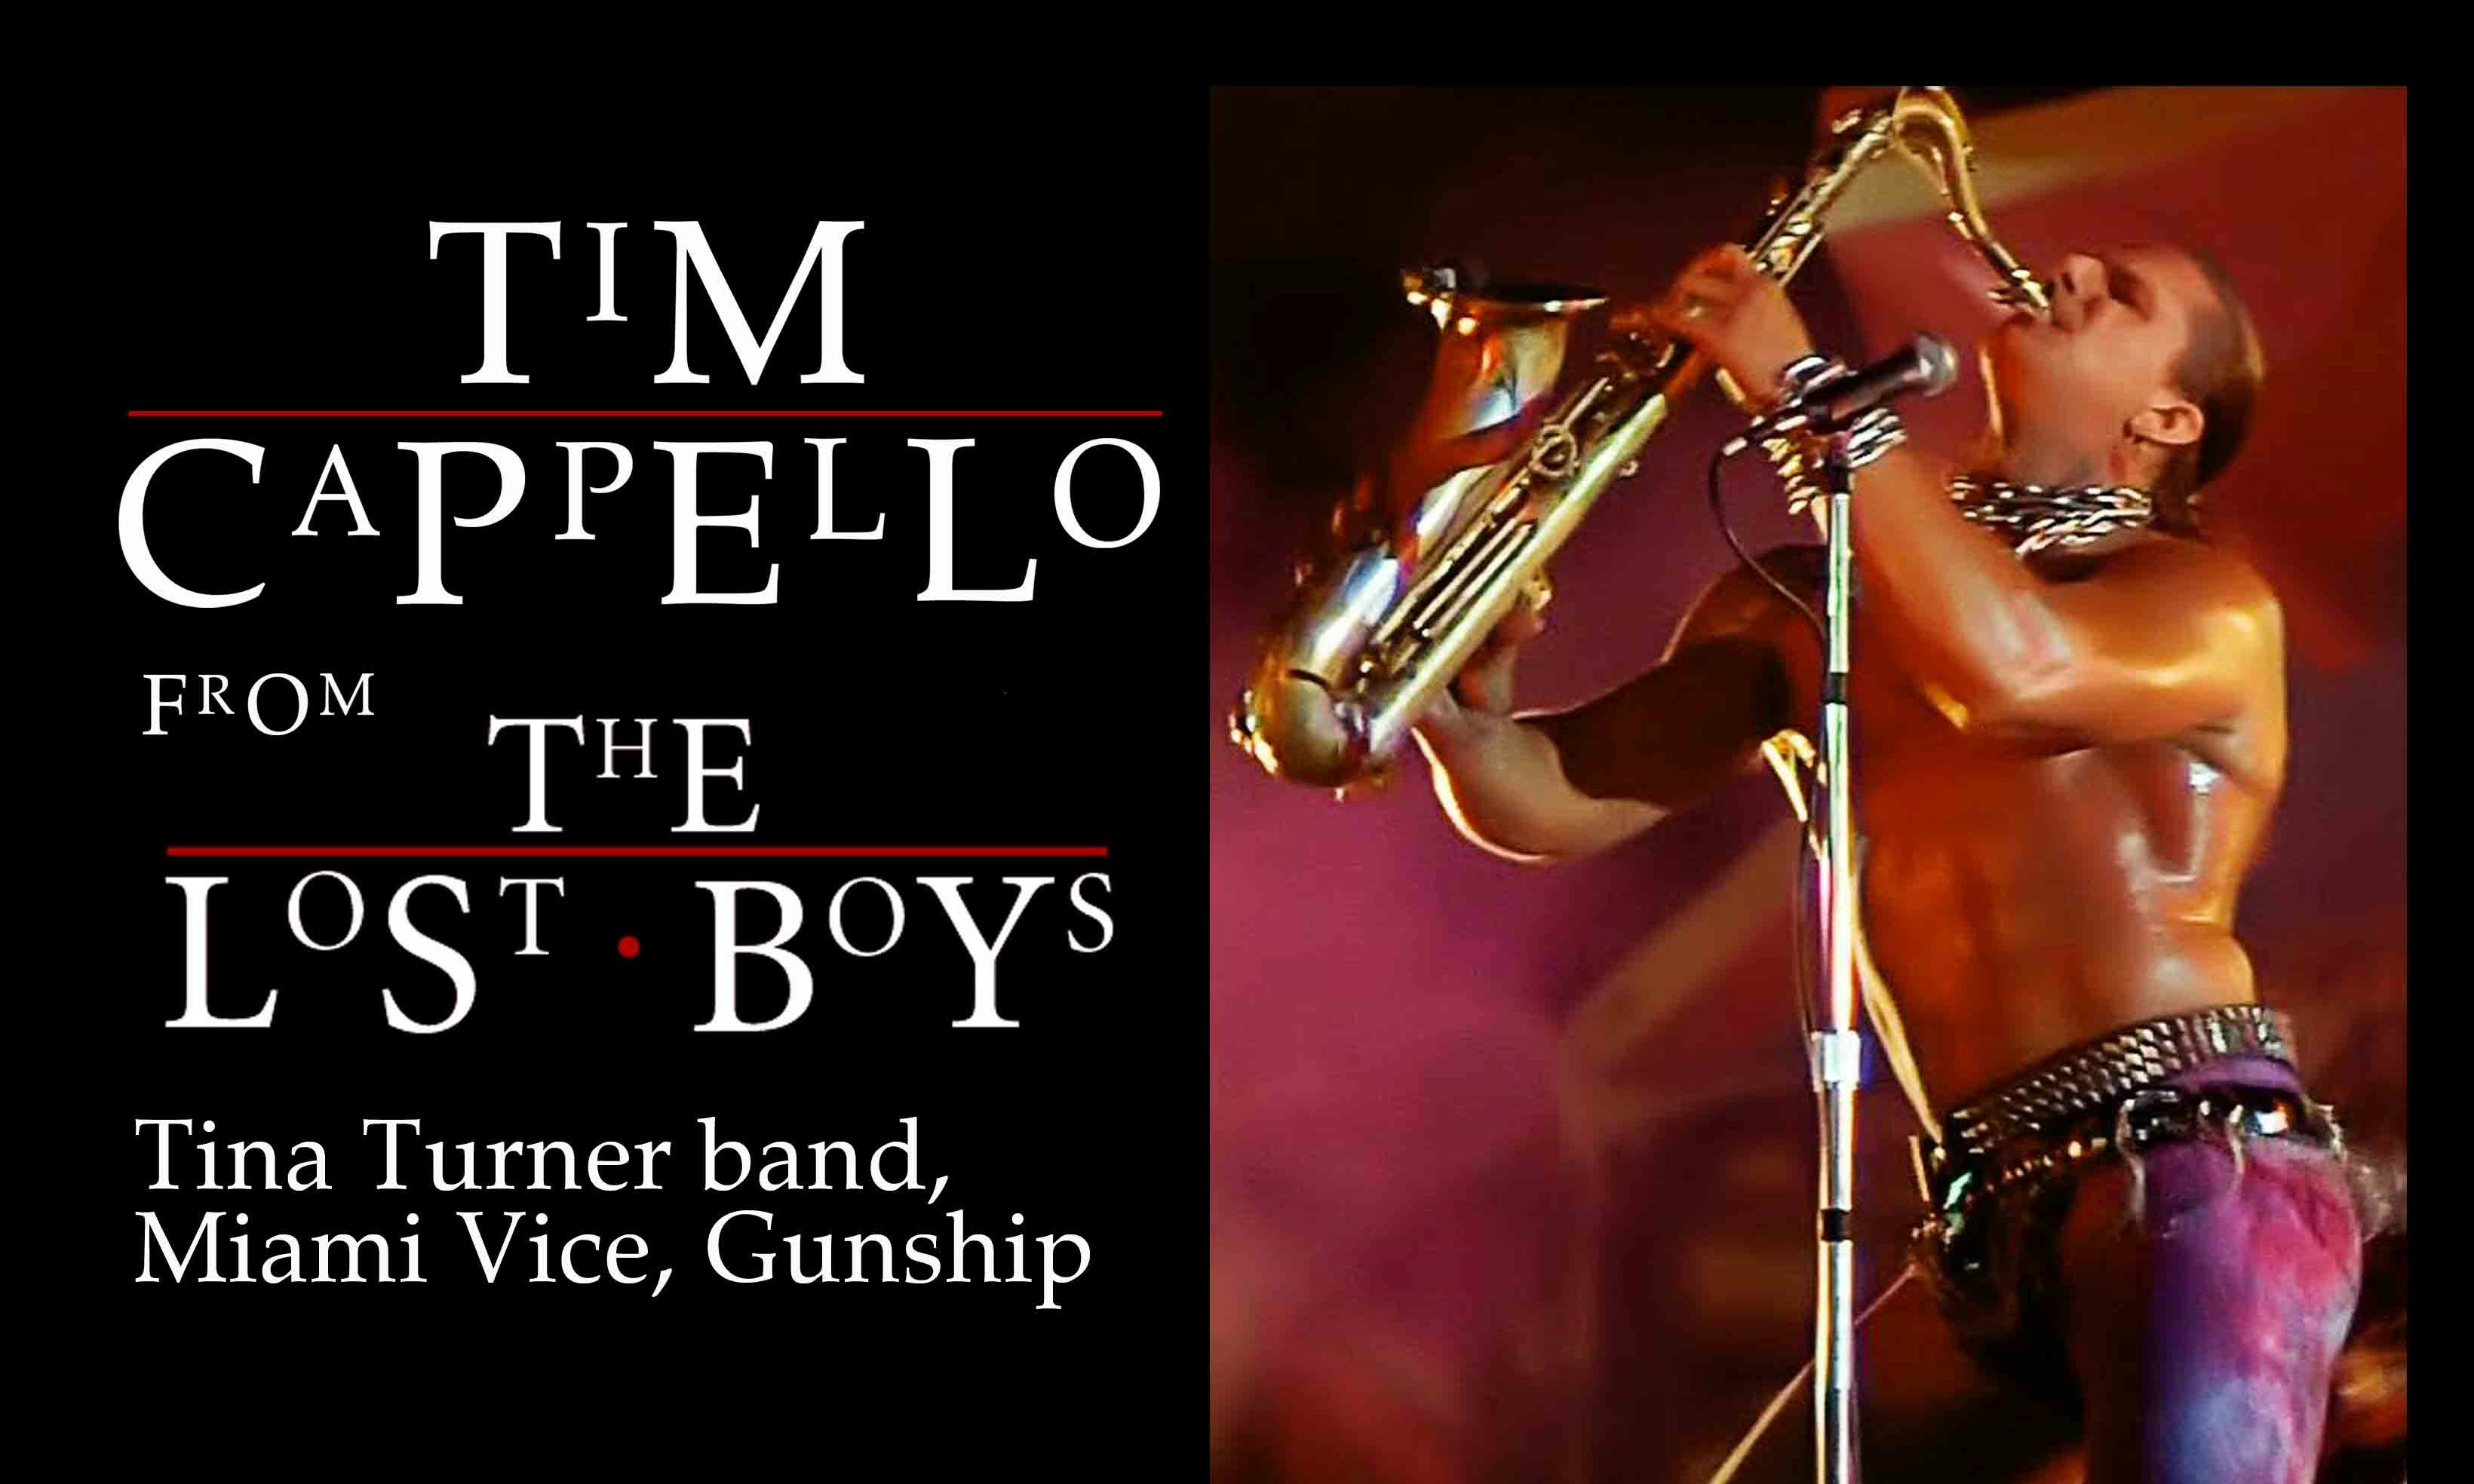 Tim Cappello (from The Lost Boys, Miami Vice, Tina Turner, Gunship) Tickets | $19.70 | Oct @ The Eighth Room, Nashville DICE